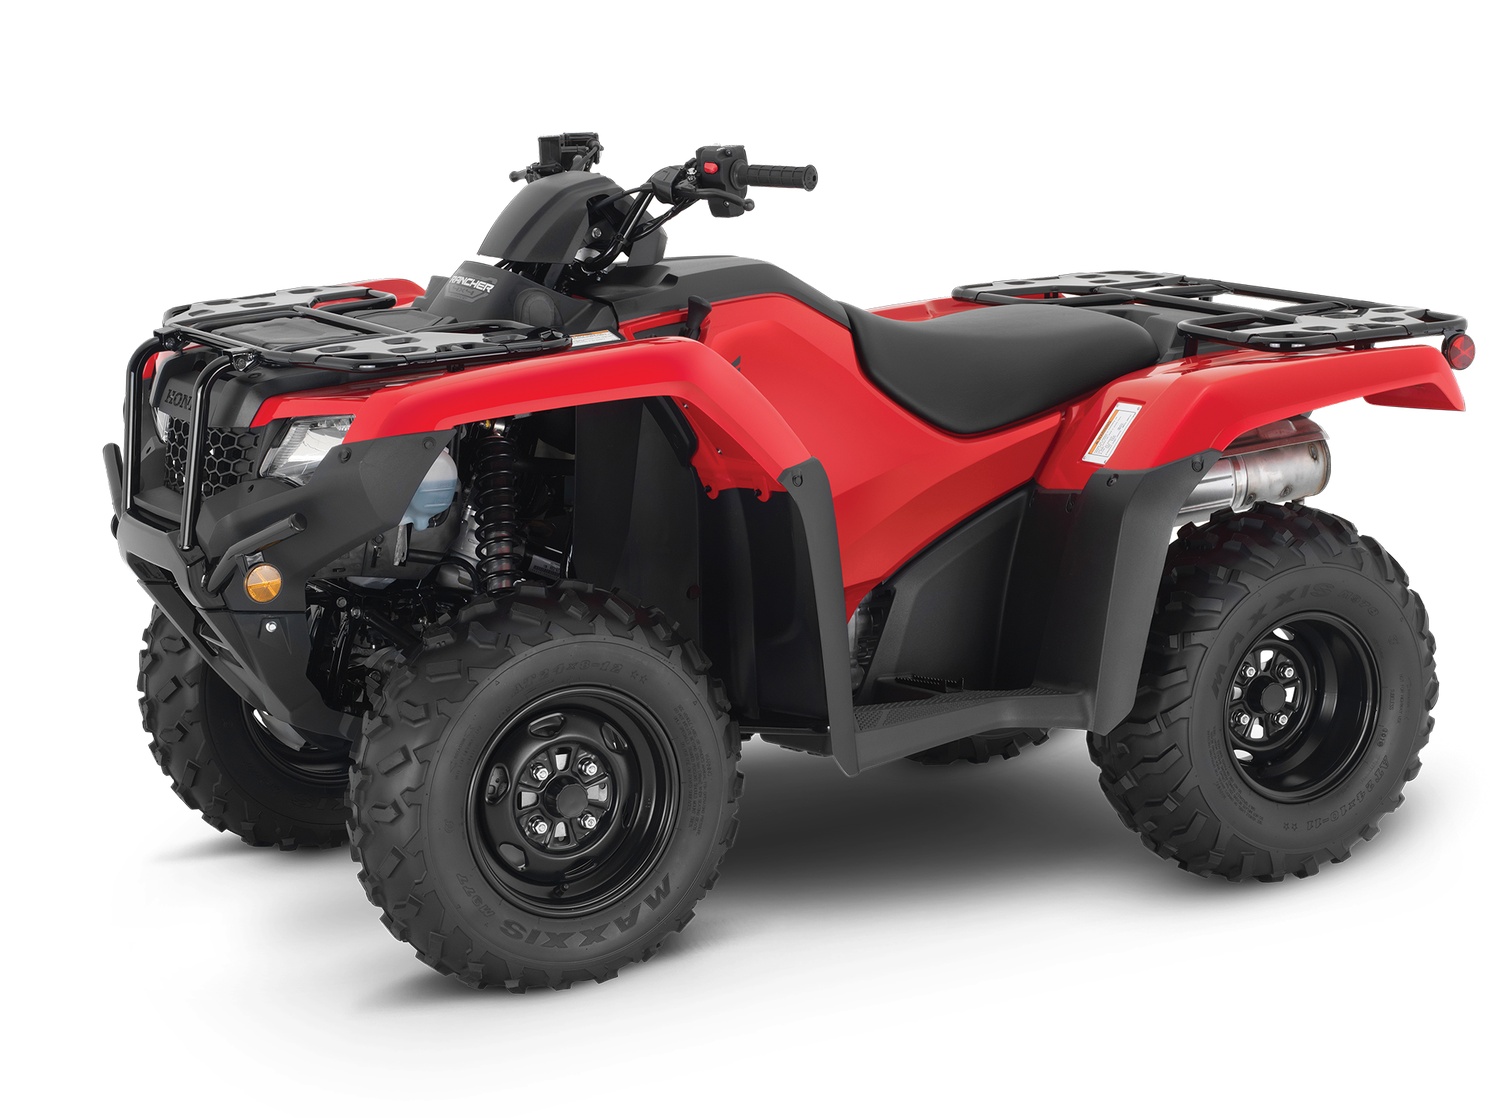 2023 Honda TRX420 RANCHER - PRE-ORDER YOURS NOW